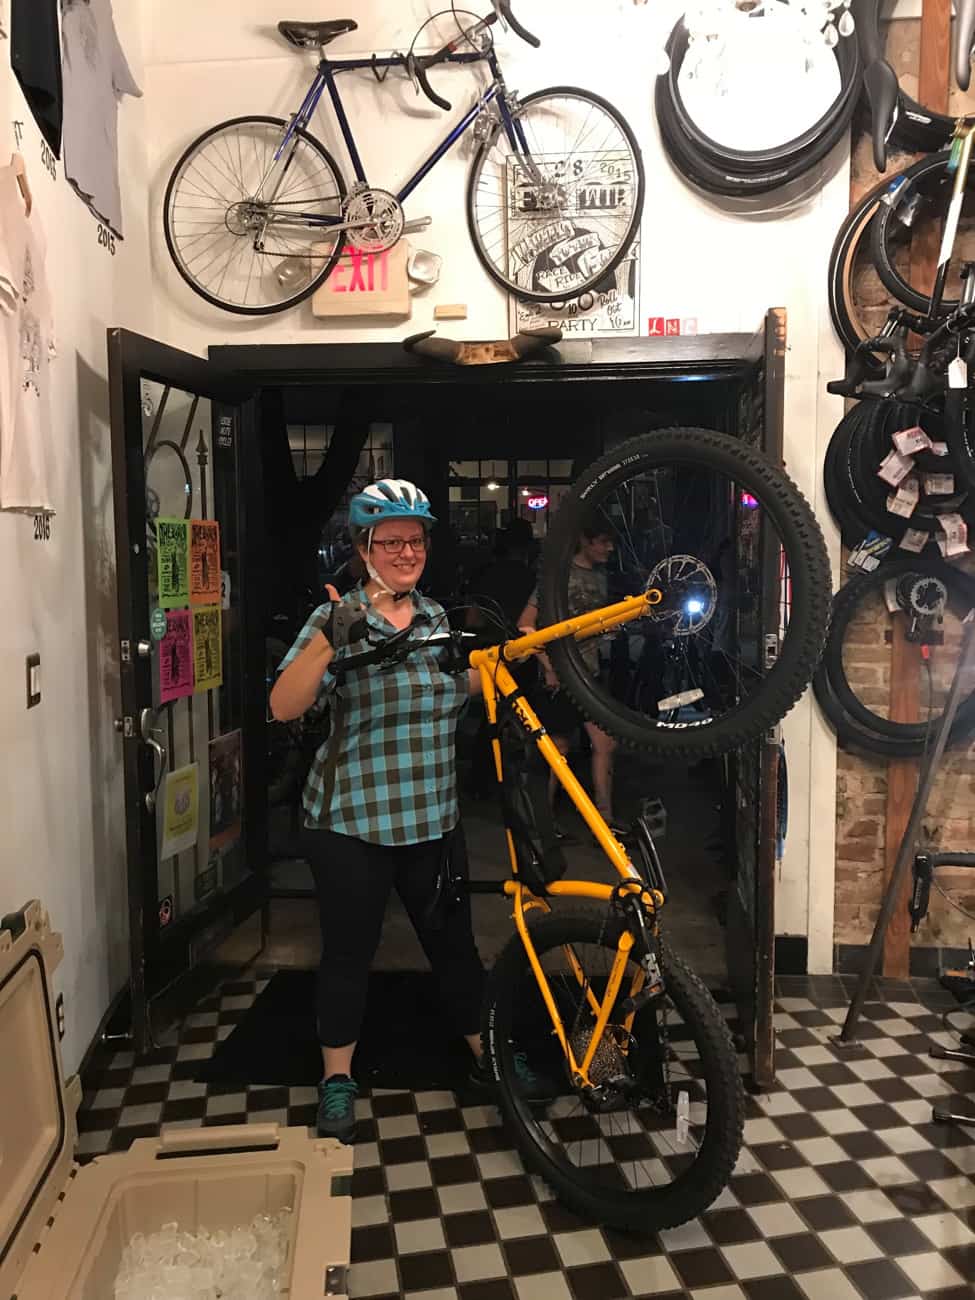 Front view of a cyclist giving a thumbs up at a bike shop, while holding a bike with front wheel popped off the ground